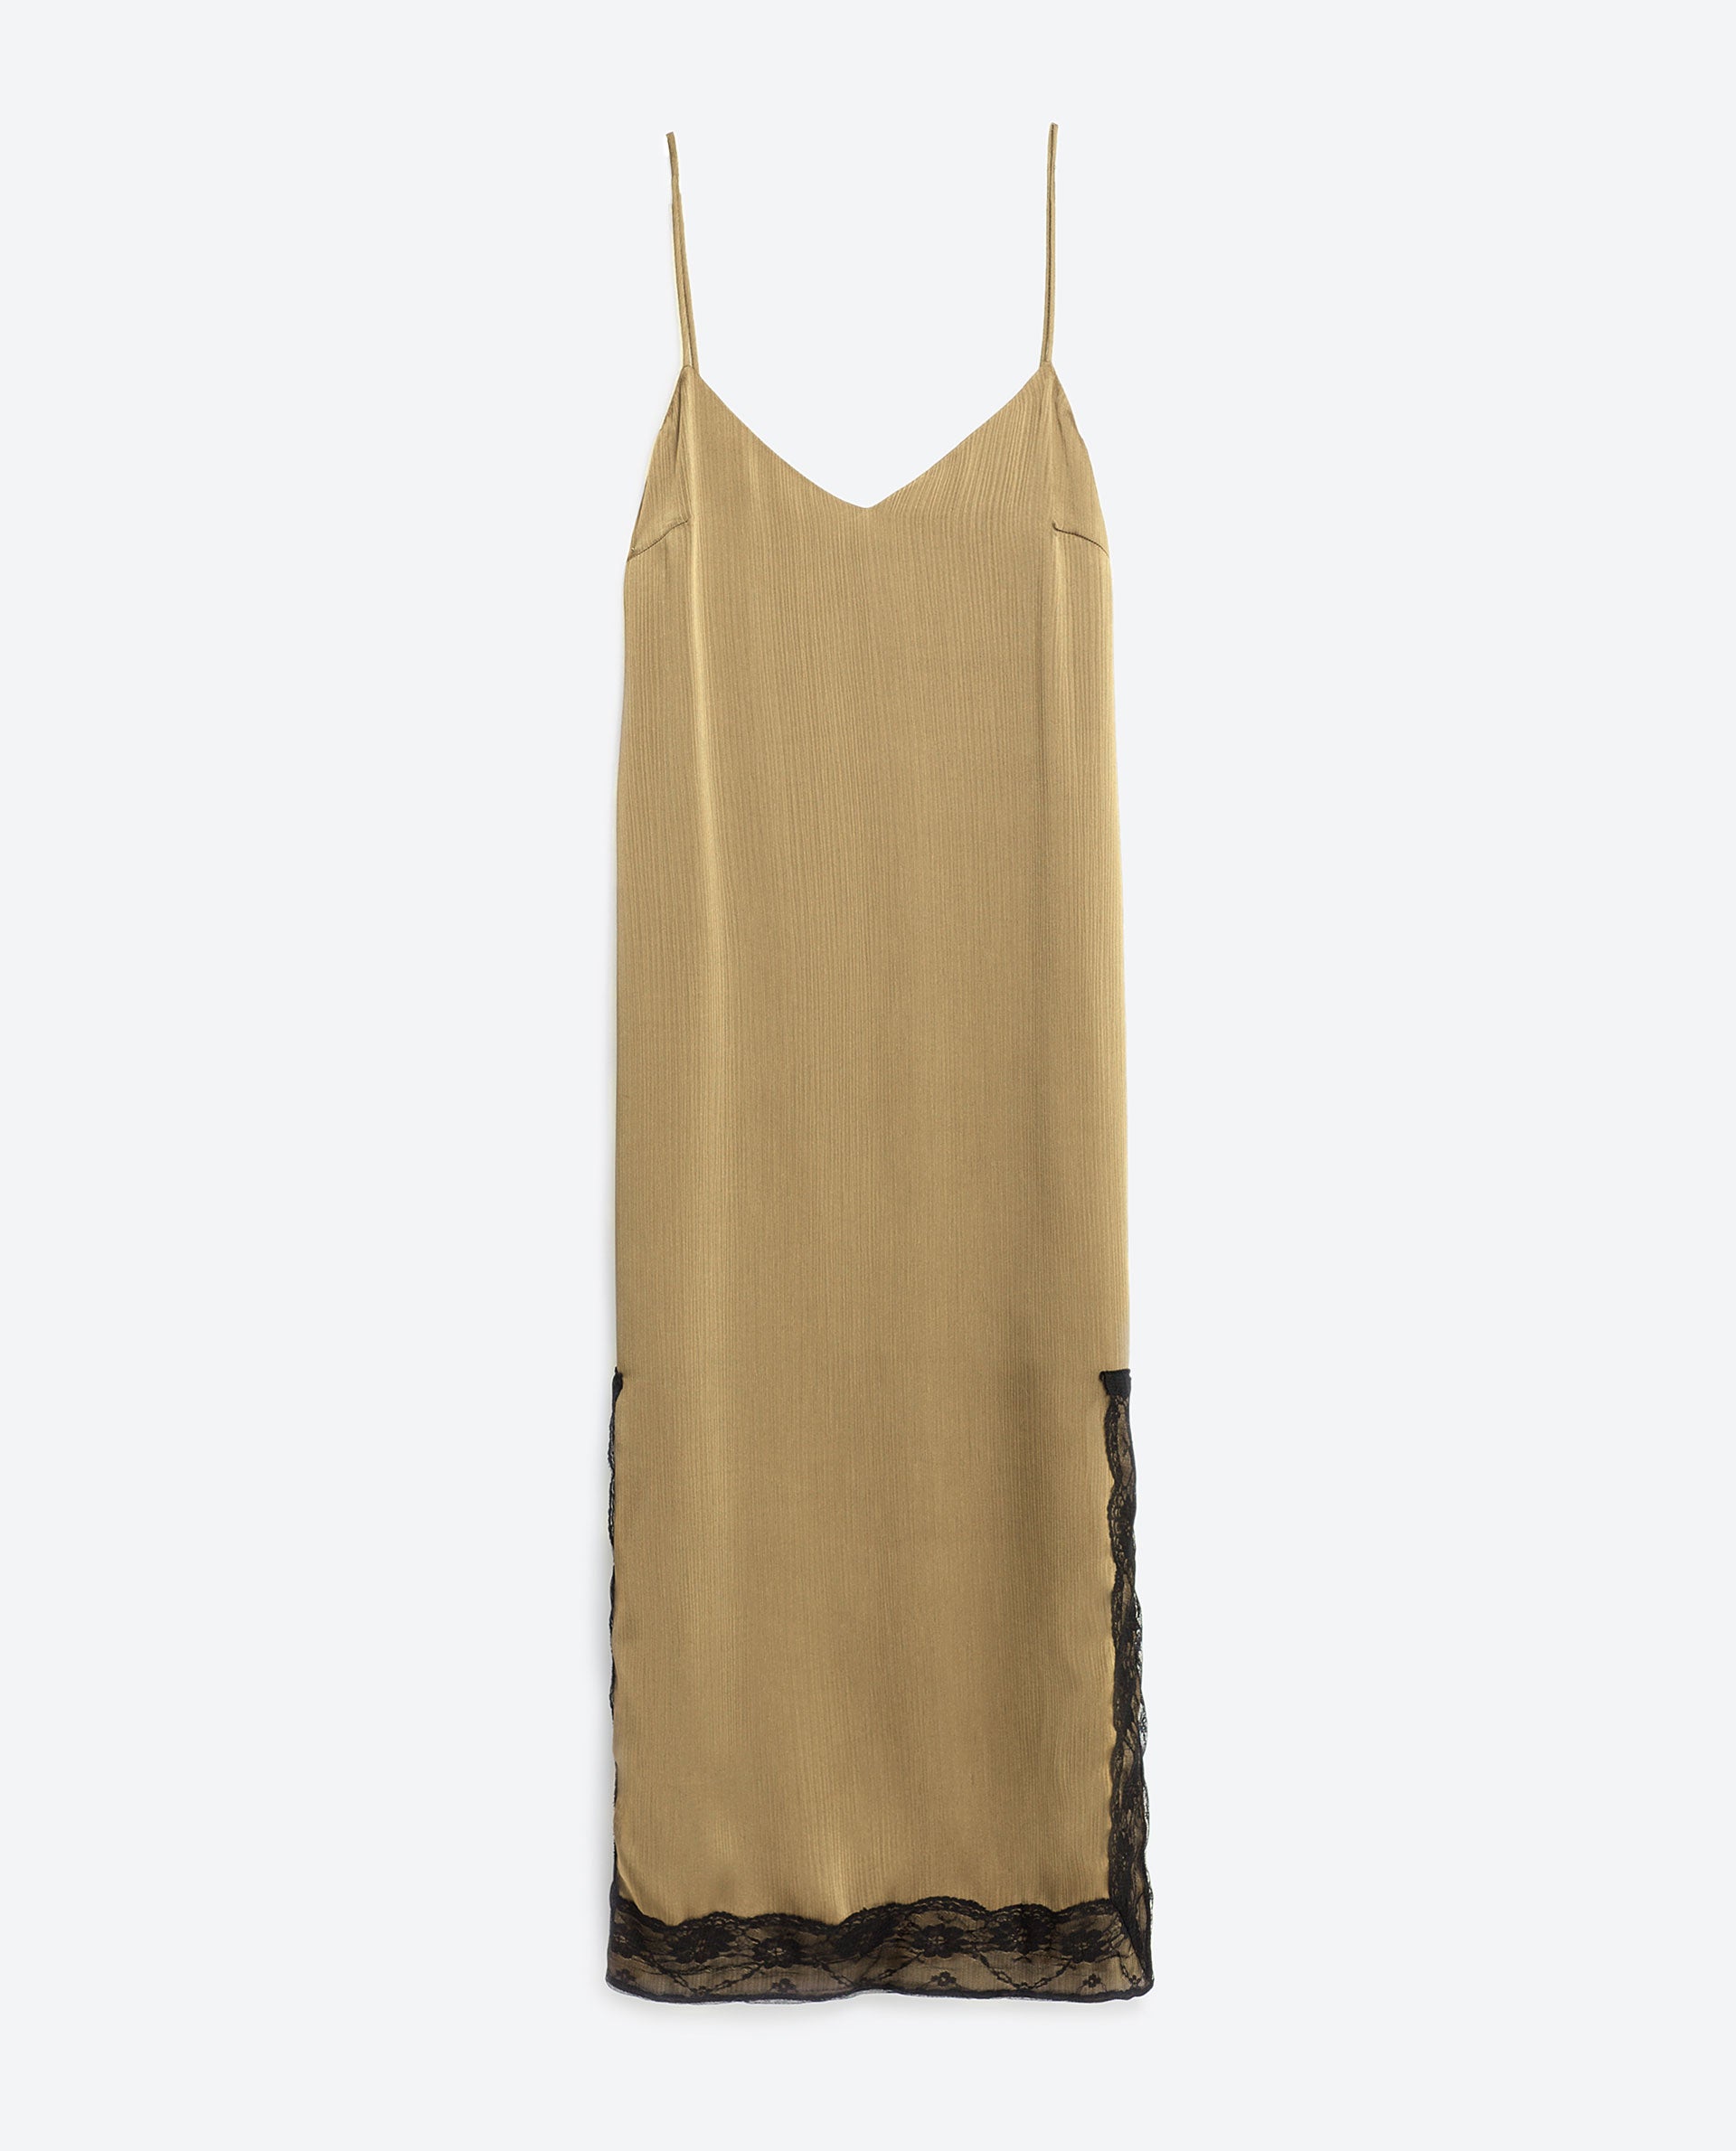 One Trend, Three Ways: A Chic, Sexy and Edgy way to Rock a Slip Dress